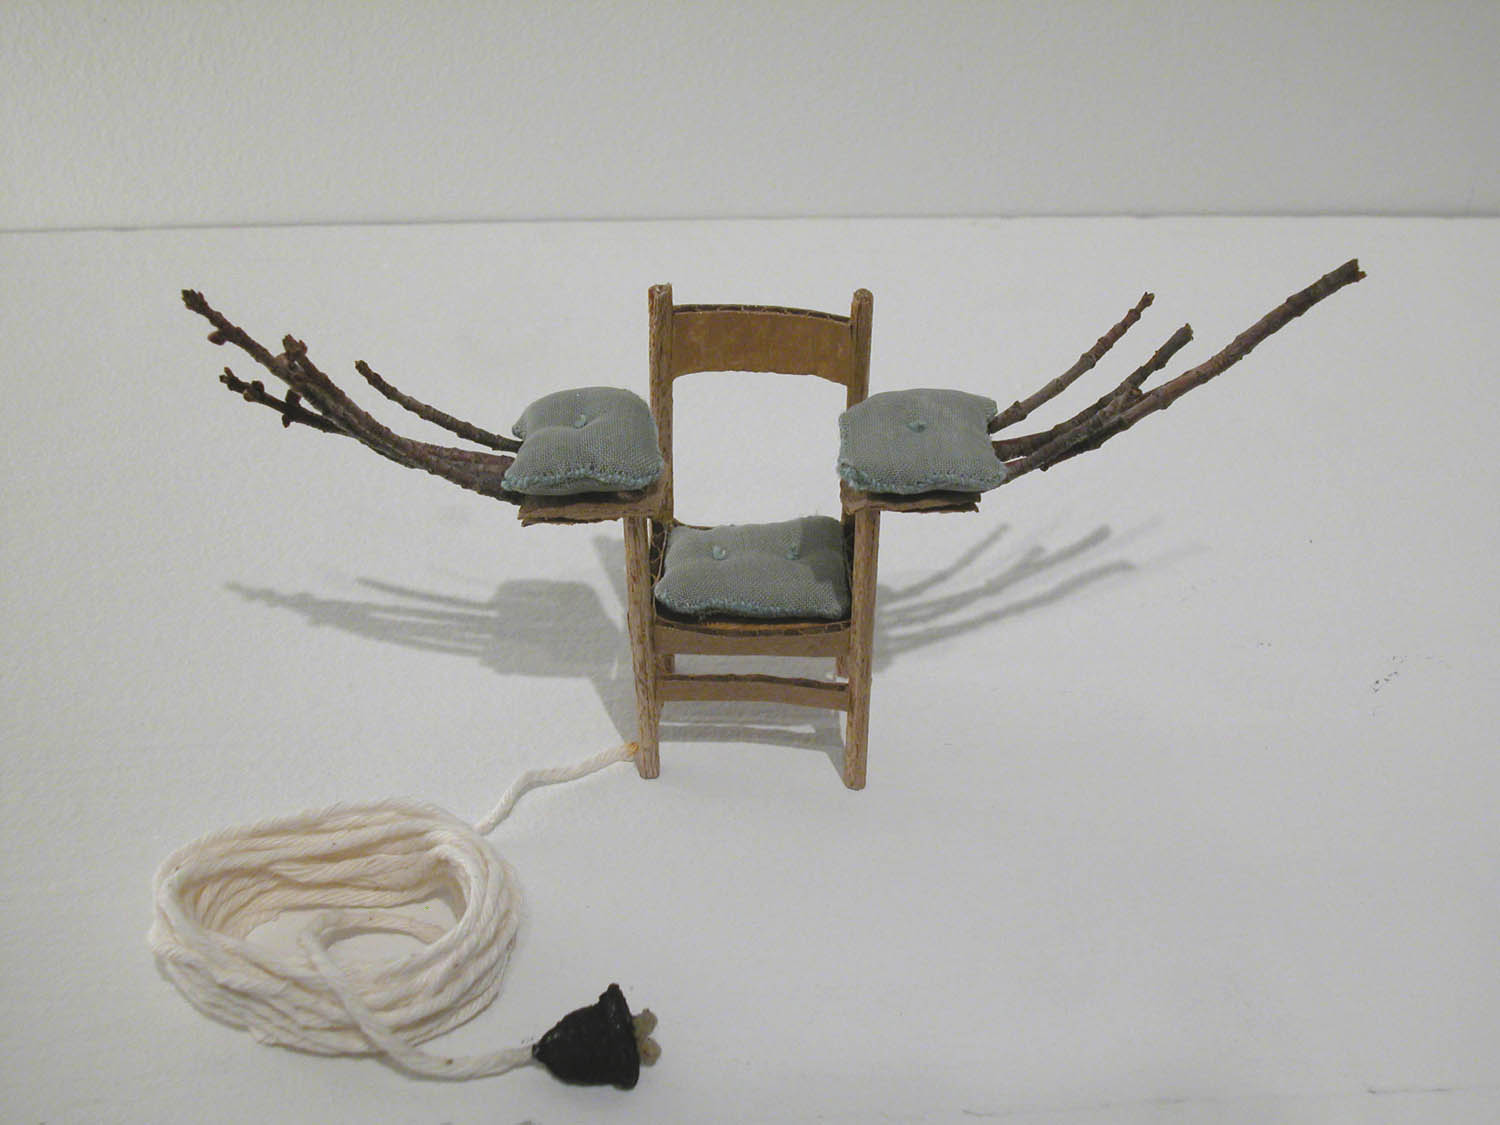 Drawing of a Wood Chair with pillows and sticks coming out of the arms